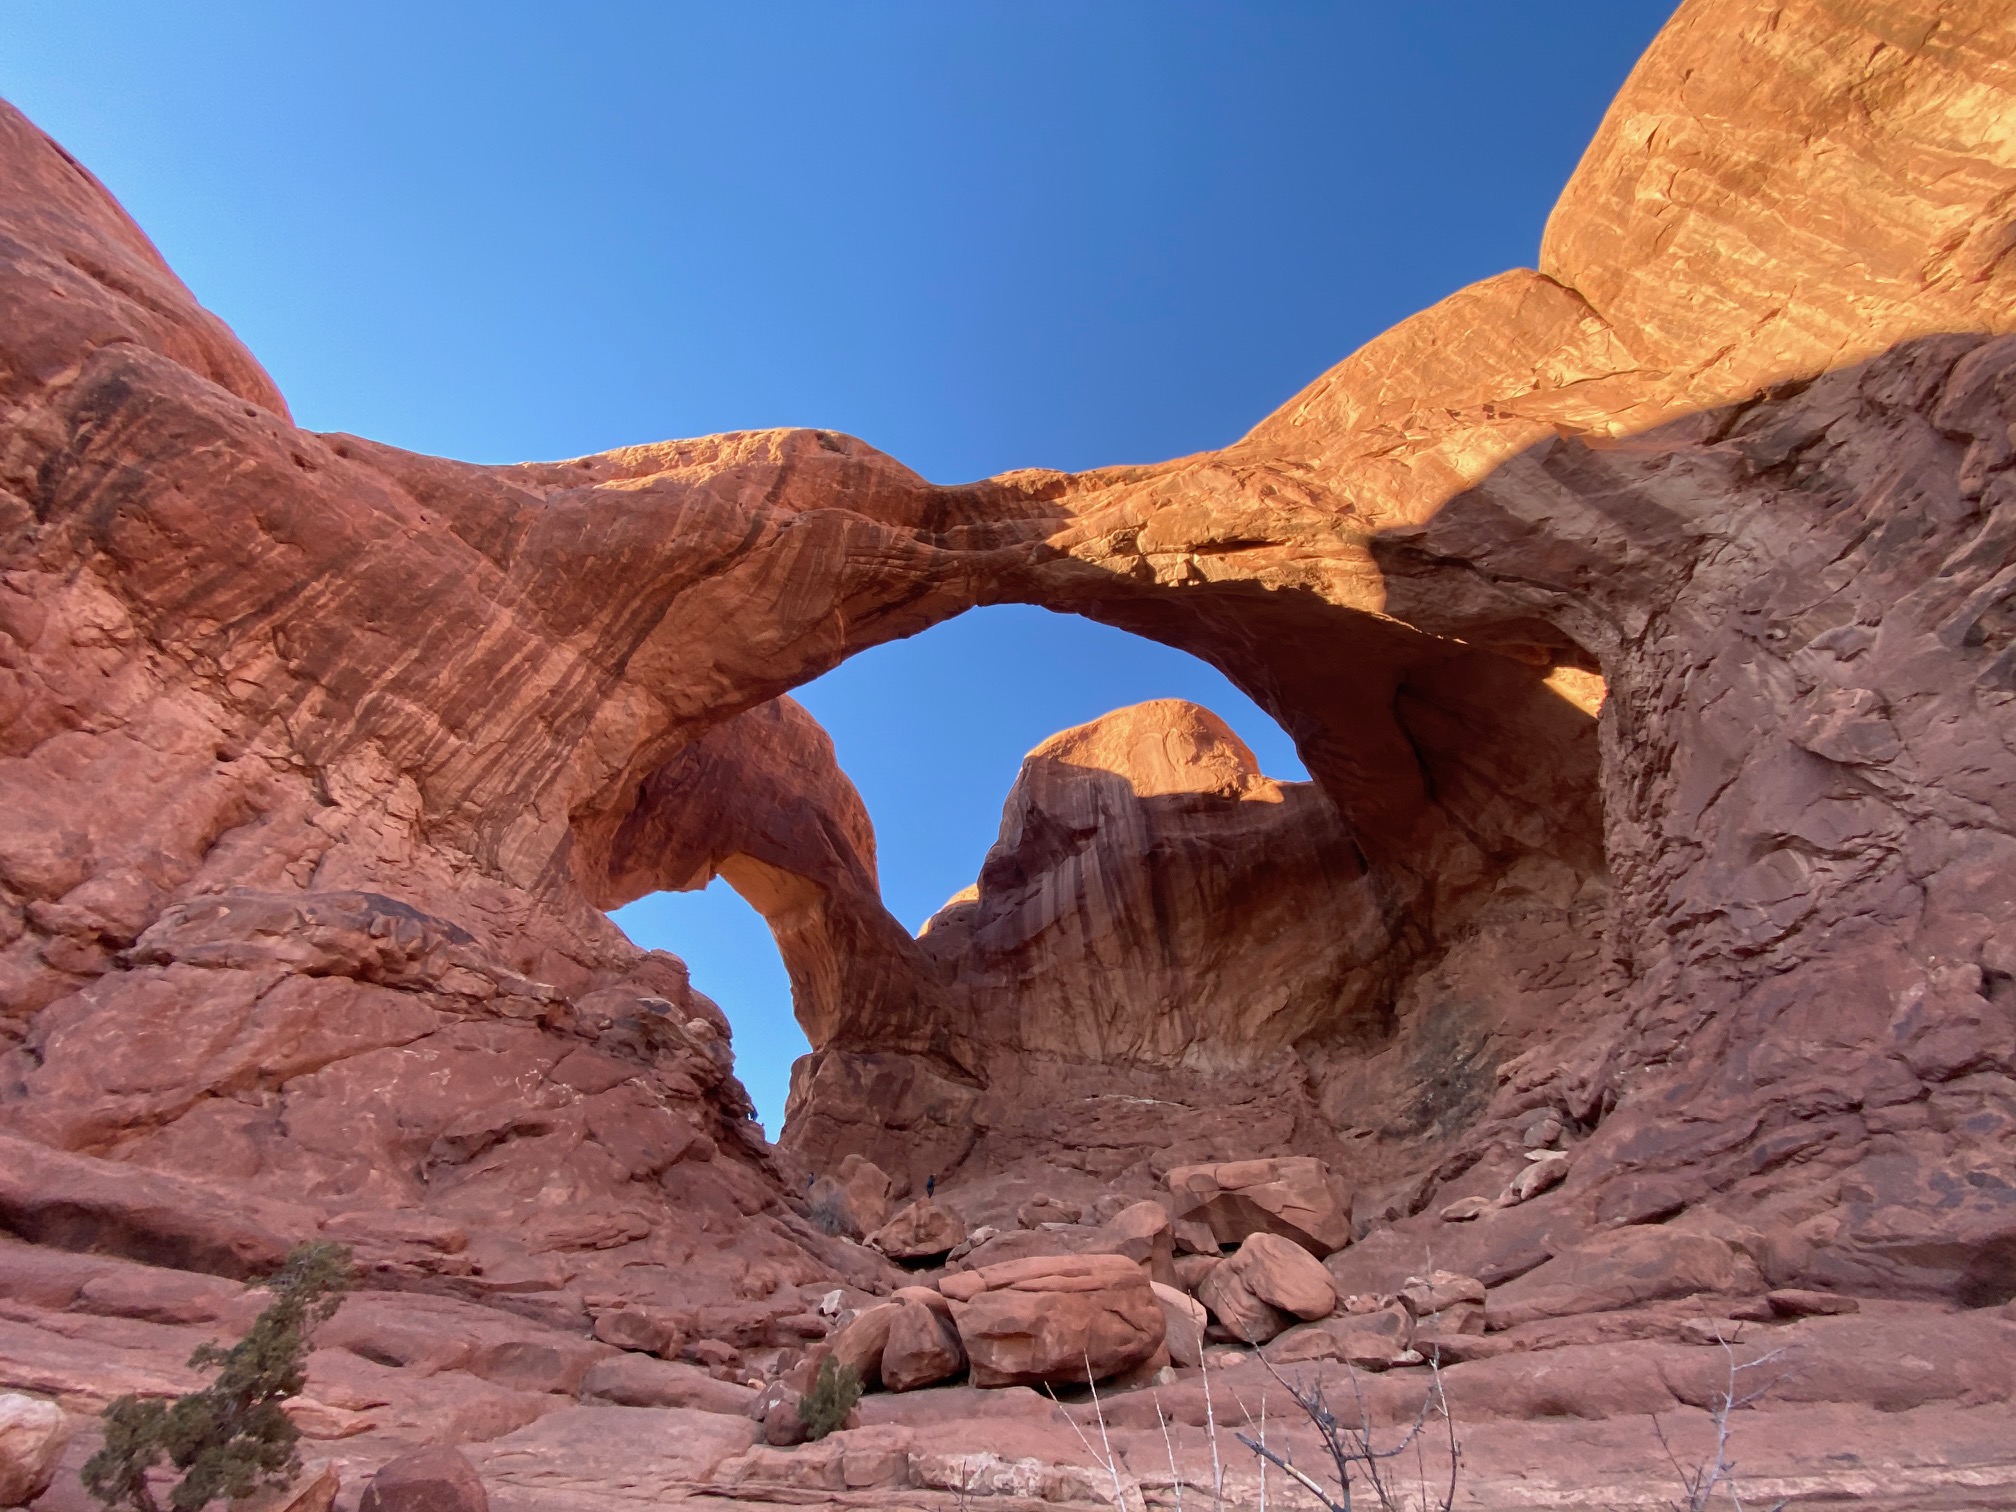 View of Double Arch formation in Arches National Park during a Utah road trip.